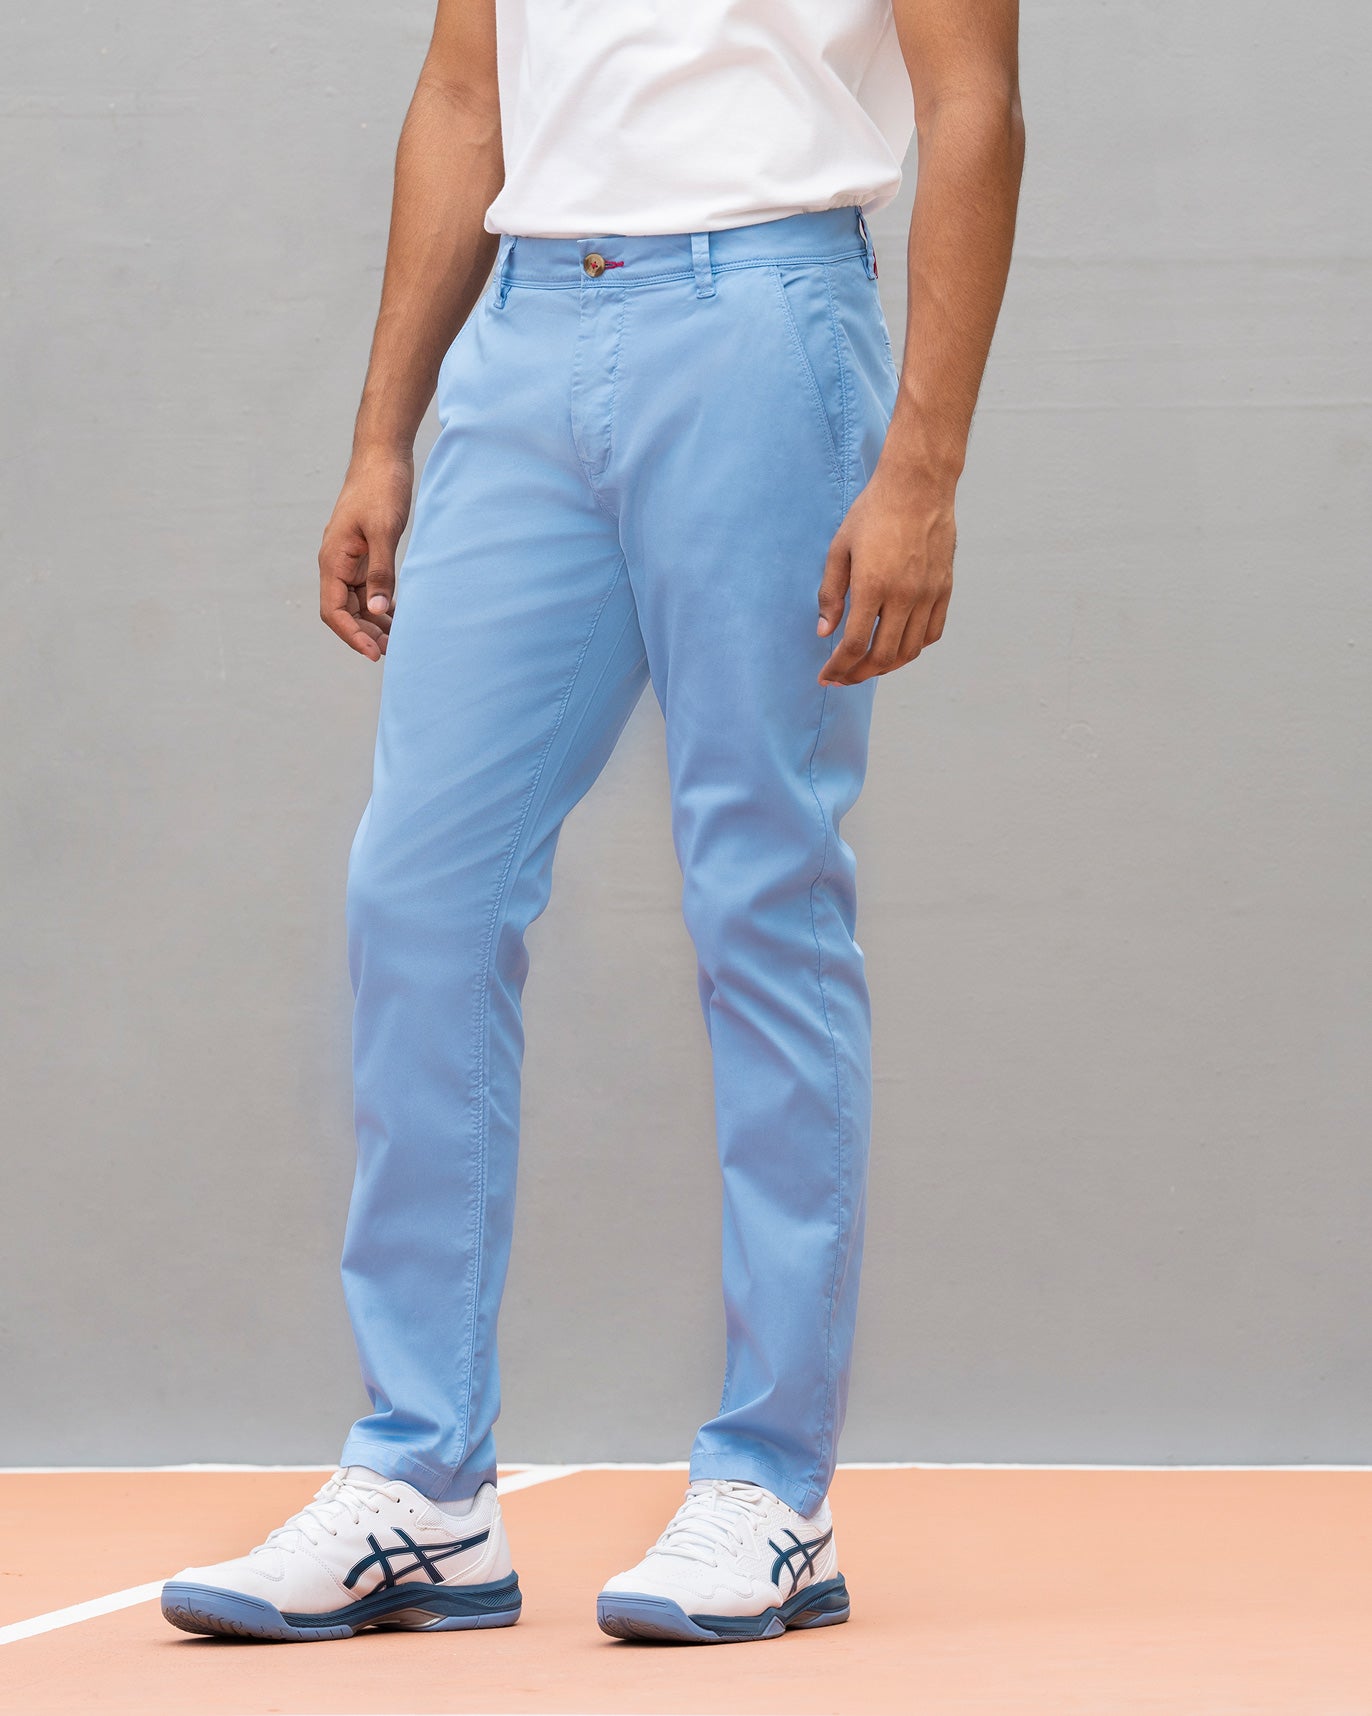 Ace Golf Trousers - Blue